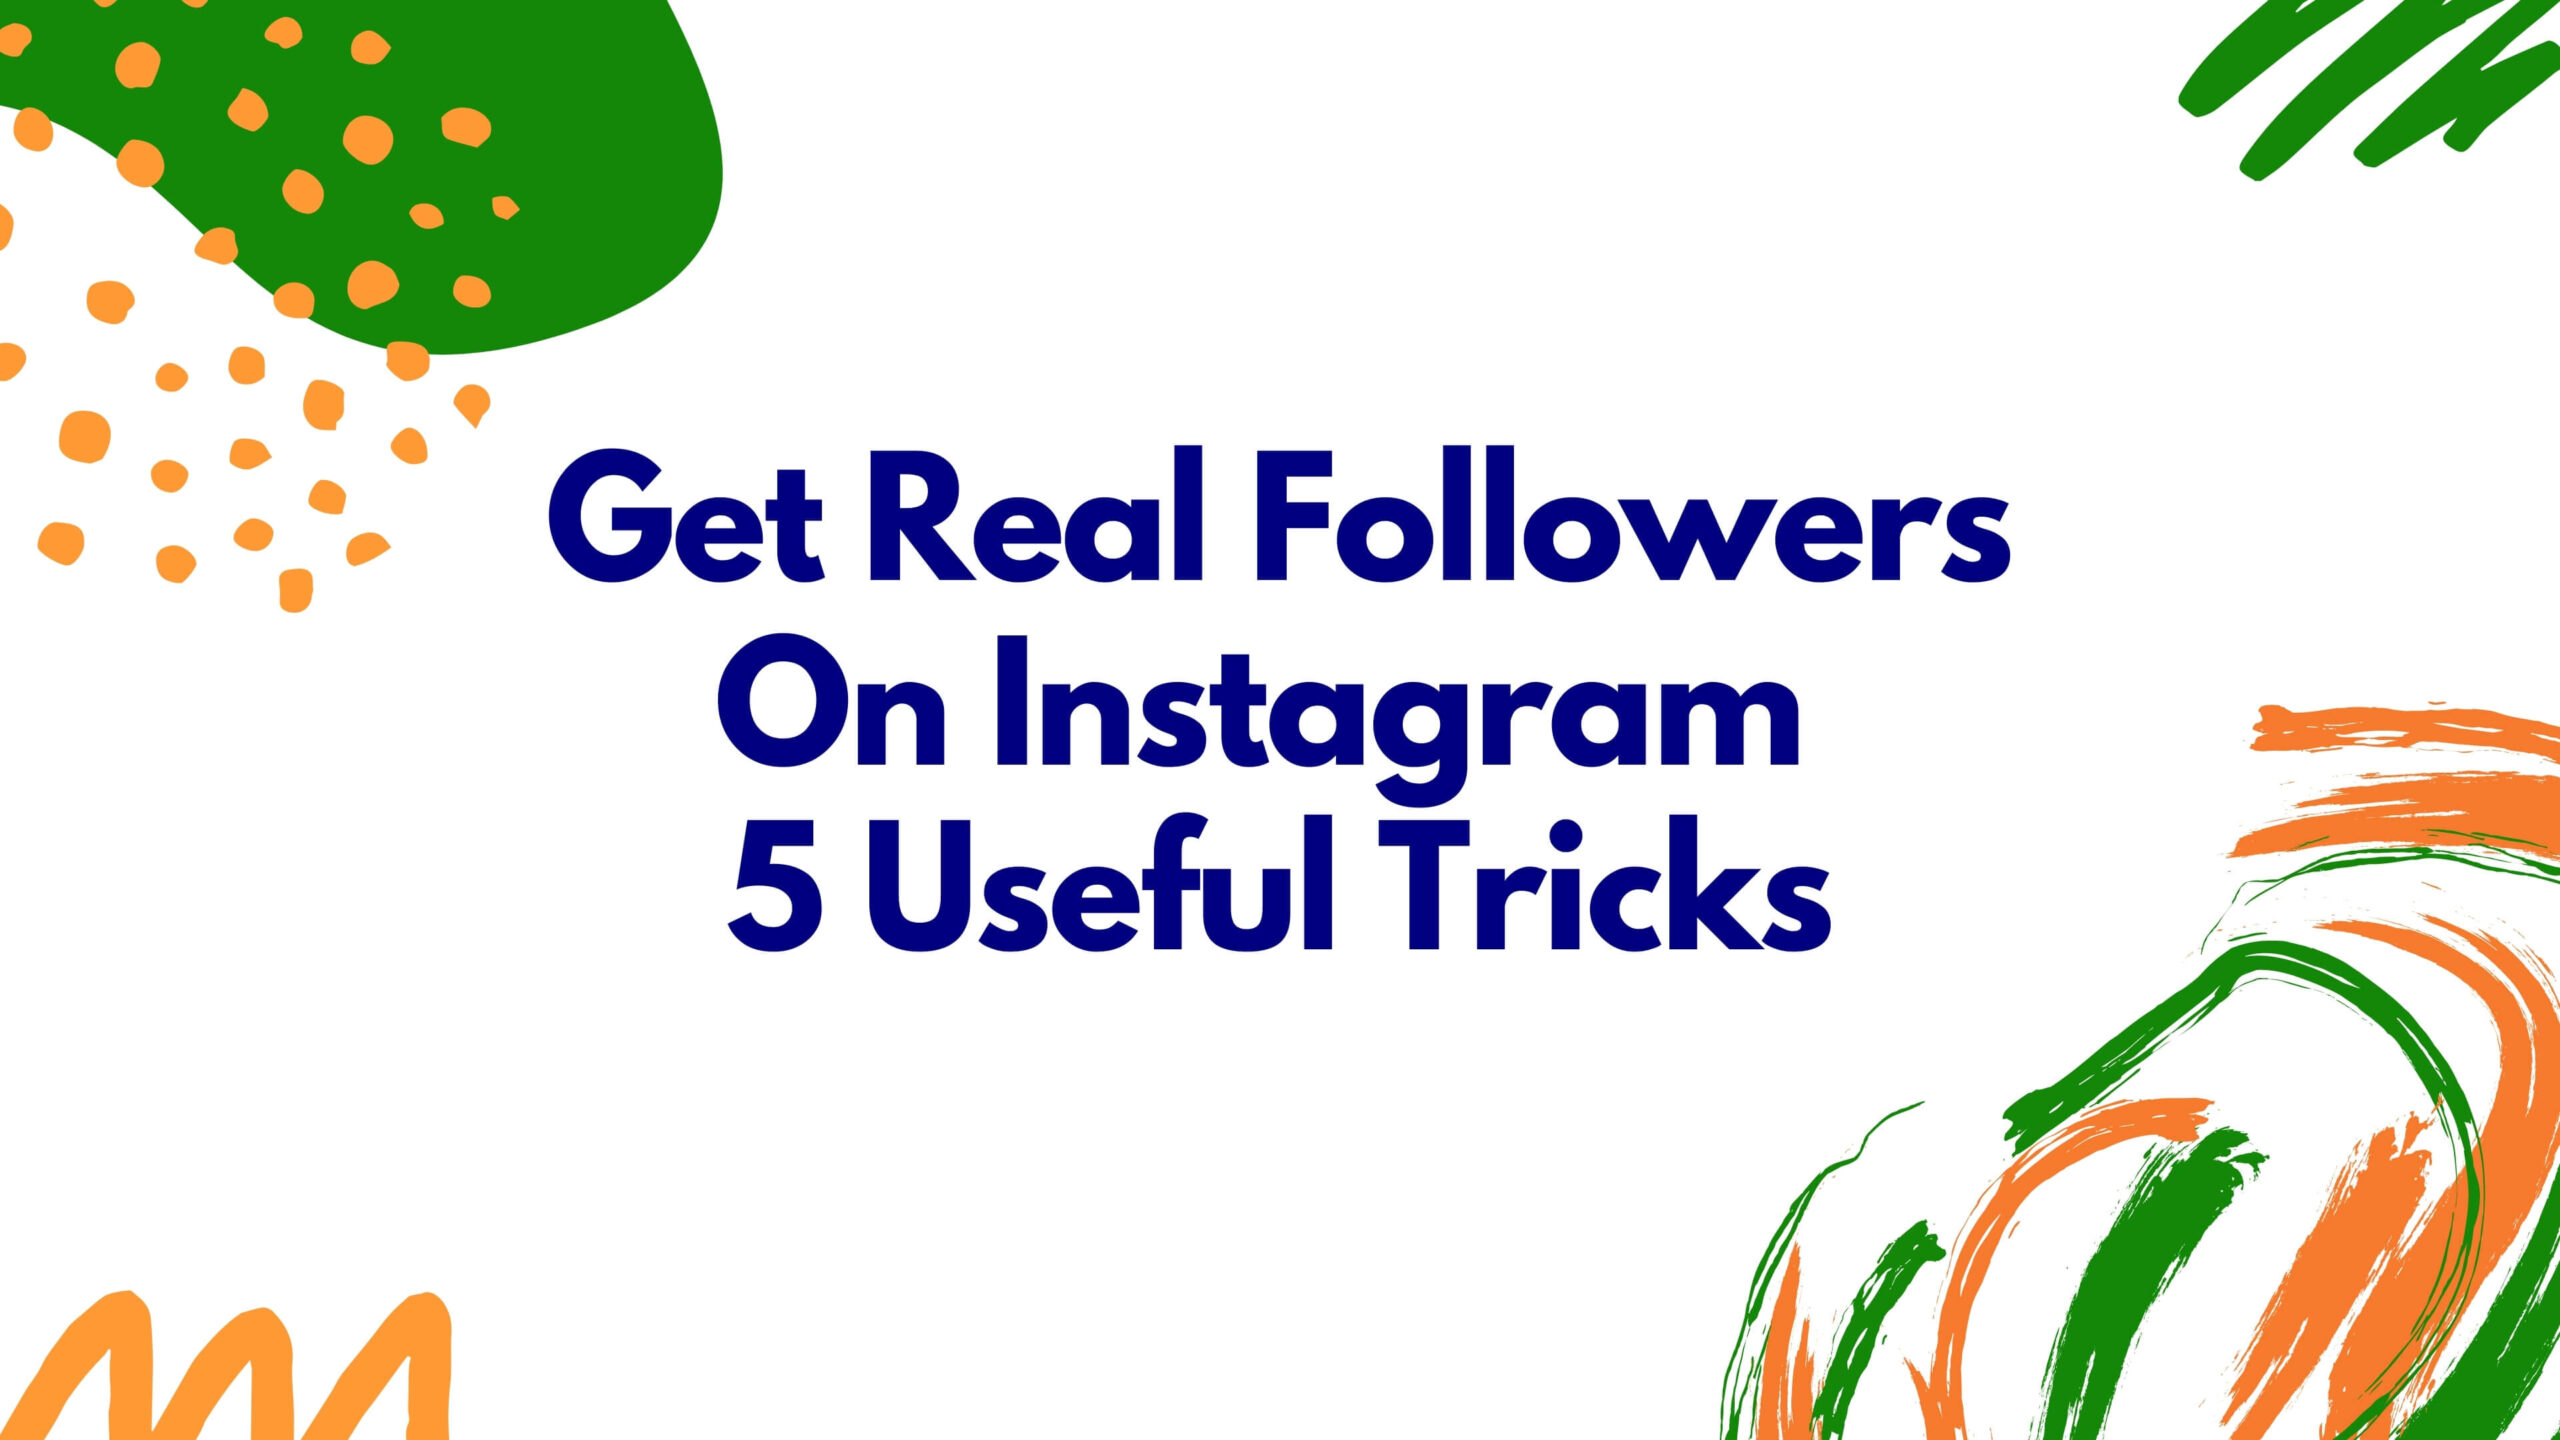 Get Real Followers On Instagram